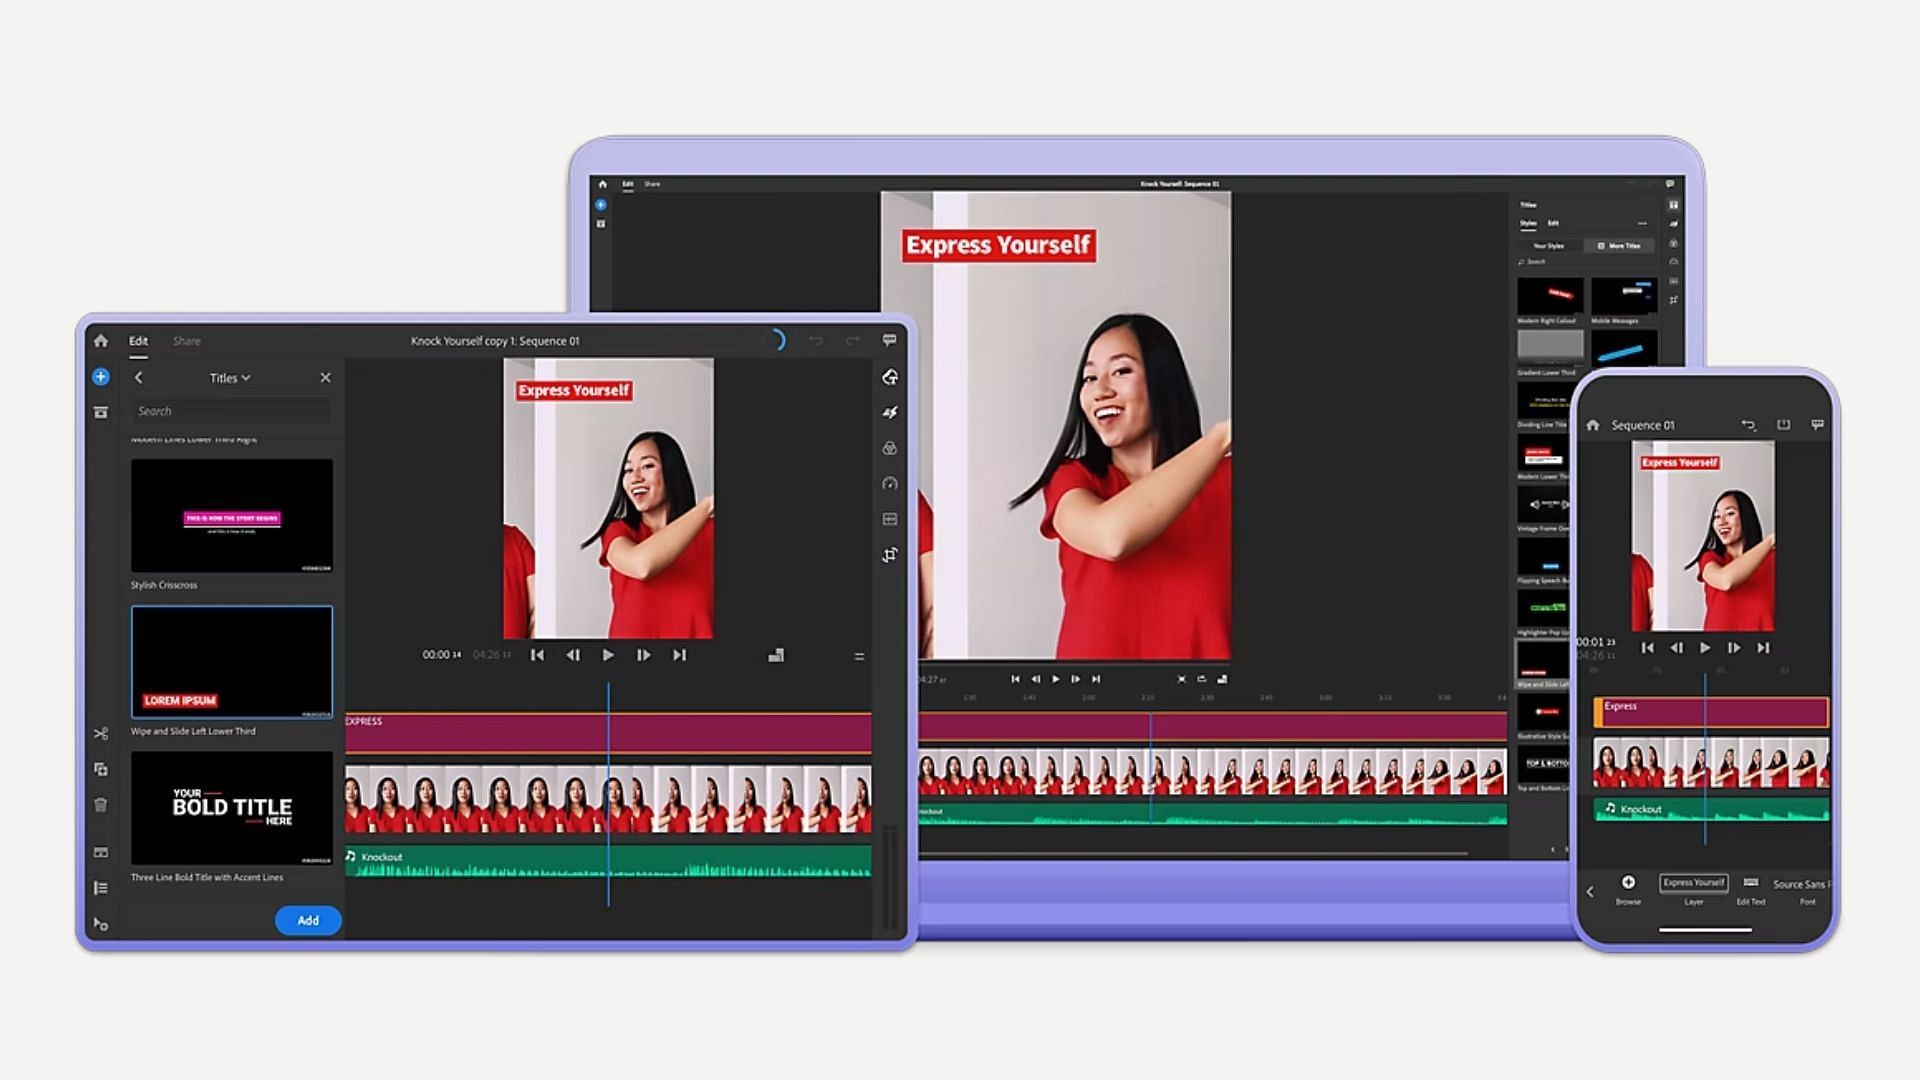 Adobe Premiere Rush is one of the robust editing software on mobile (Image via Adobe)